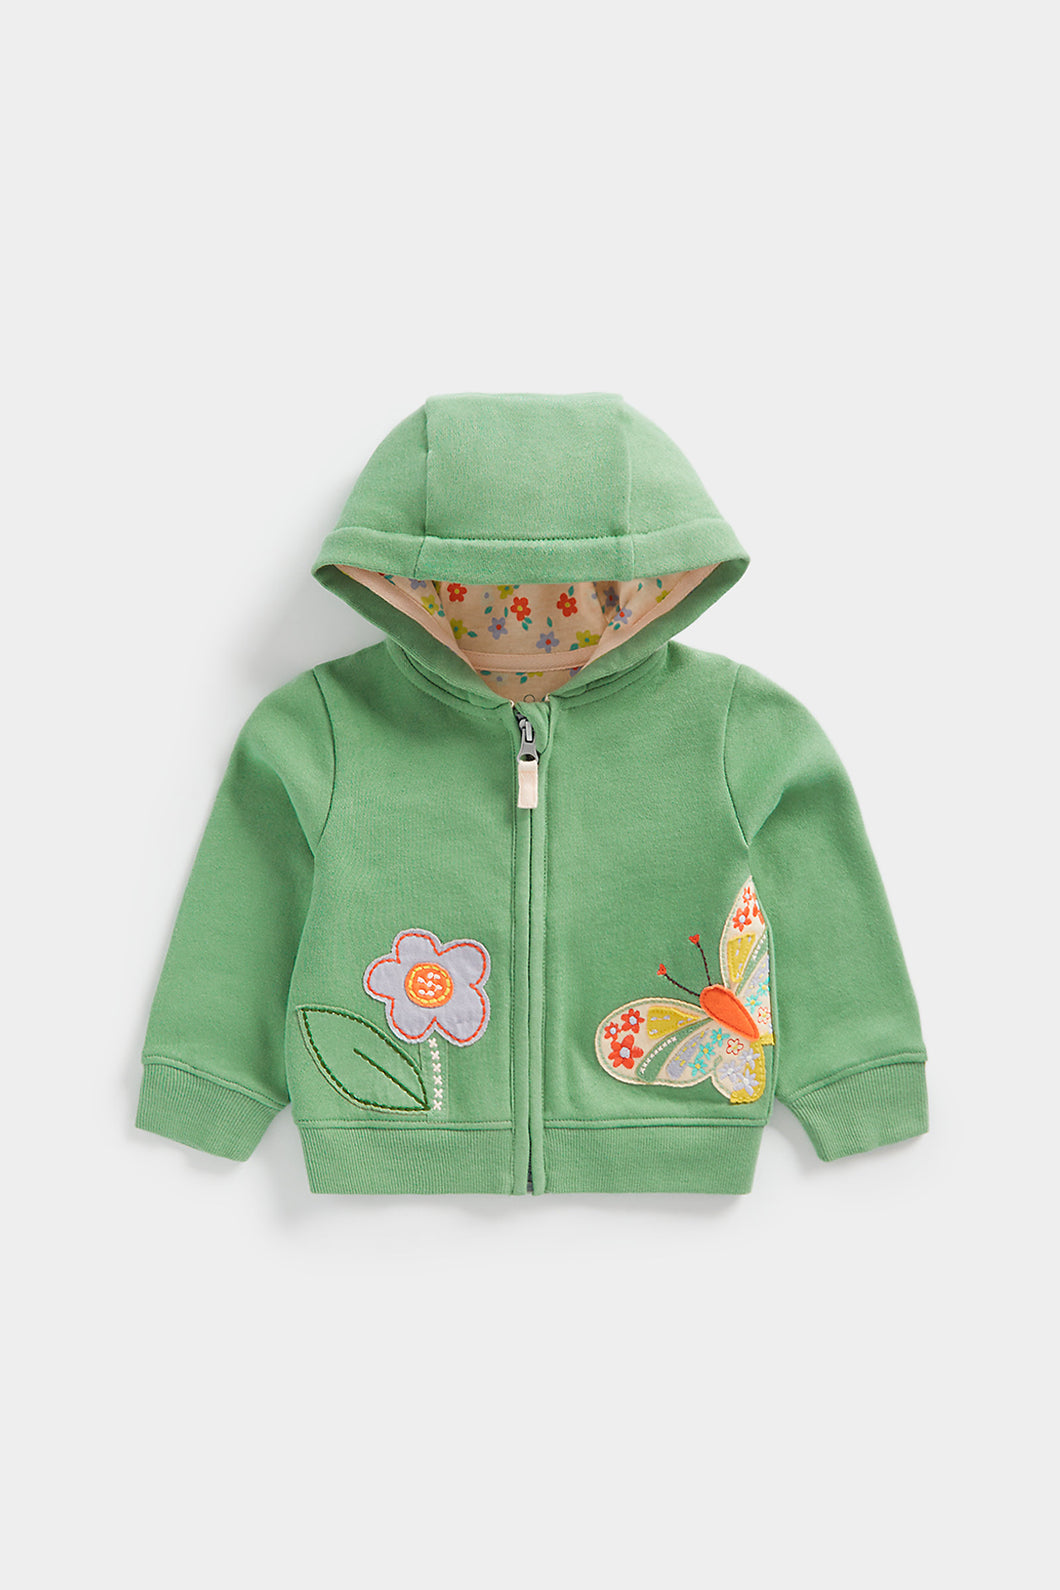 Mothercare Nature Trail Zip-Up Hoody